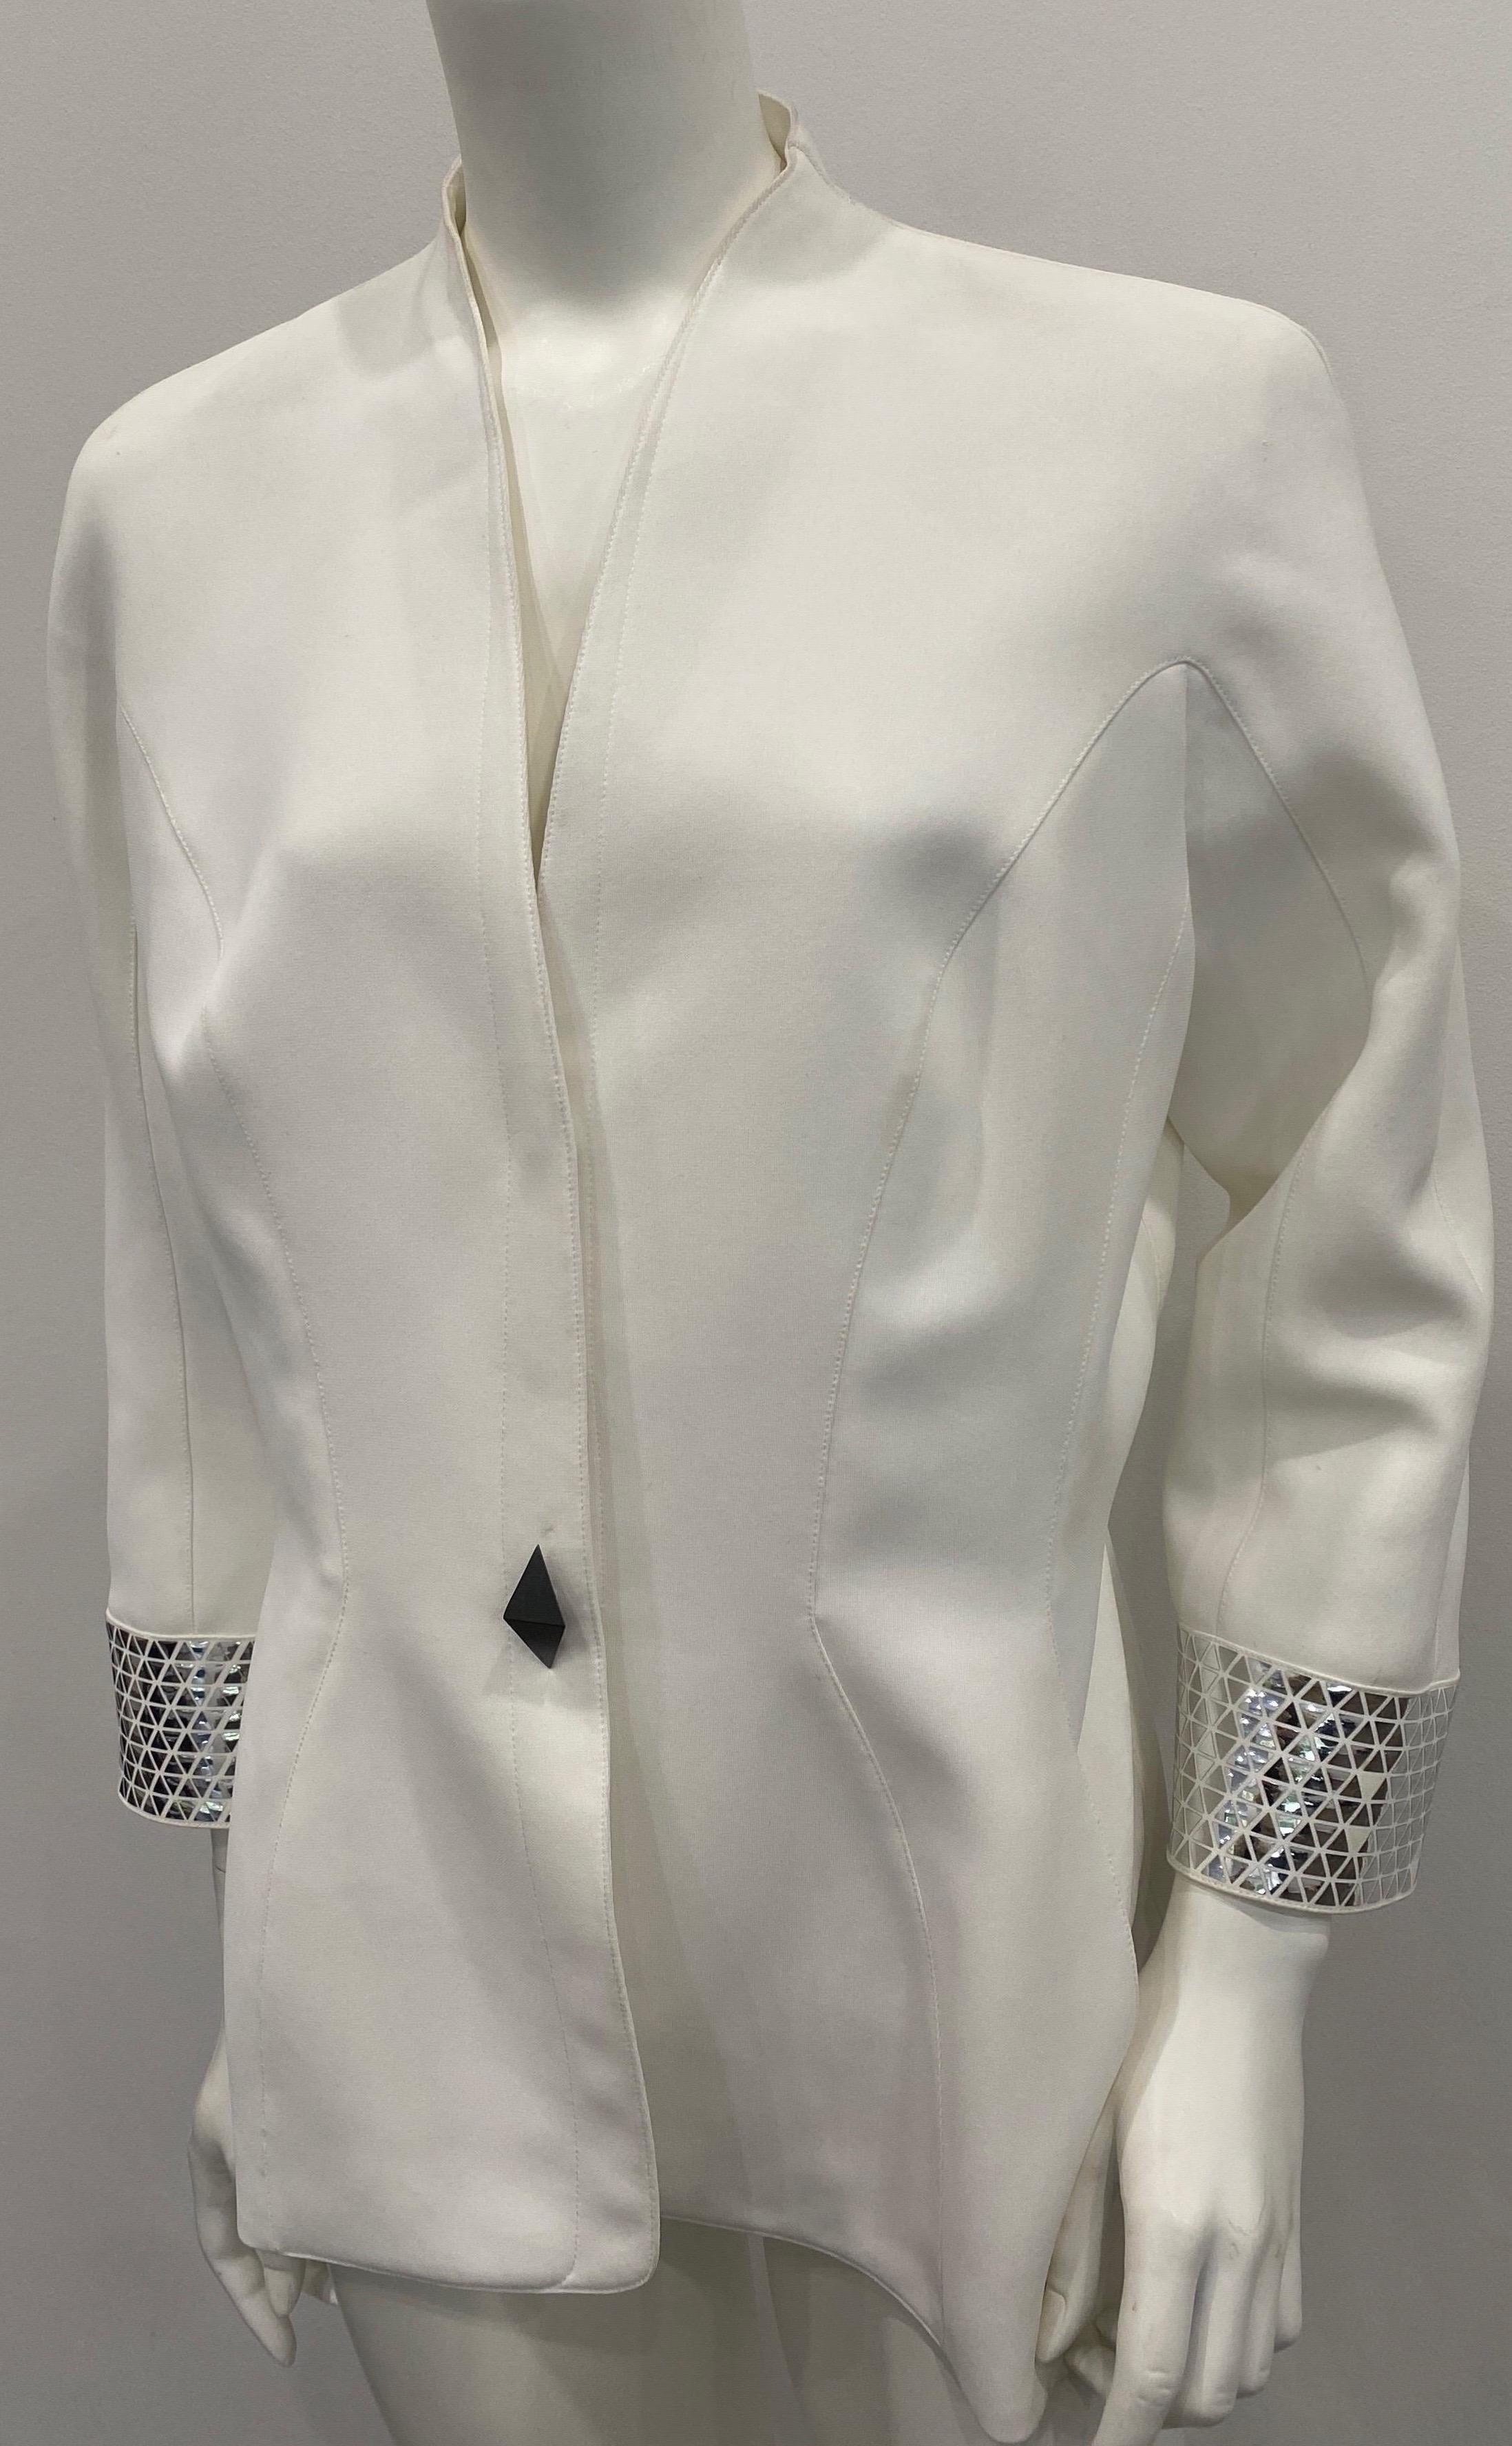 Thierry Mugler Couture 1990s White Jacket with Silver metallic details - Size 46 For Sale 1